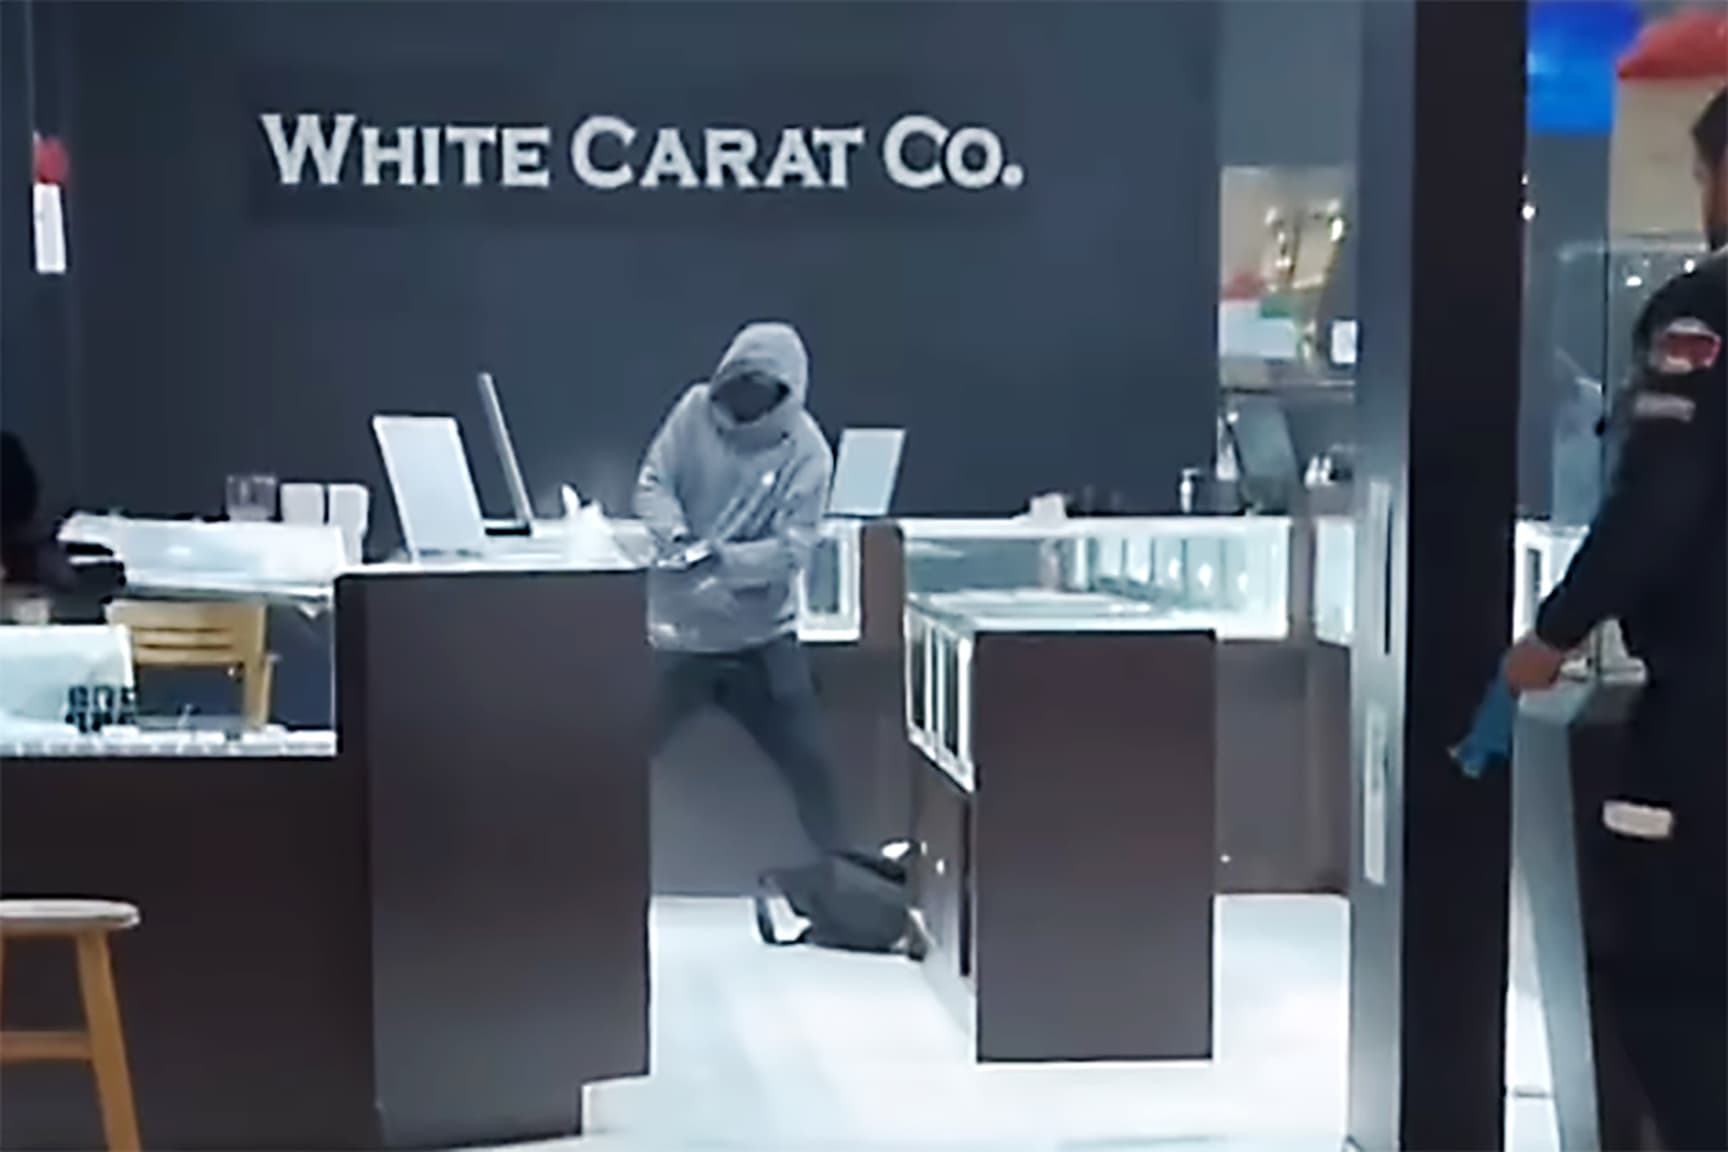 Image from the White Carat Co jewellry store robbery that took place Nov. 8